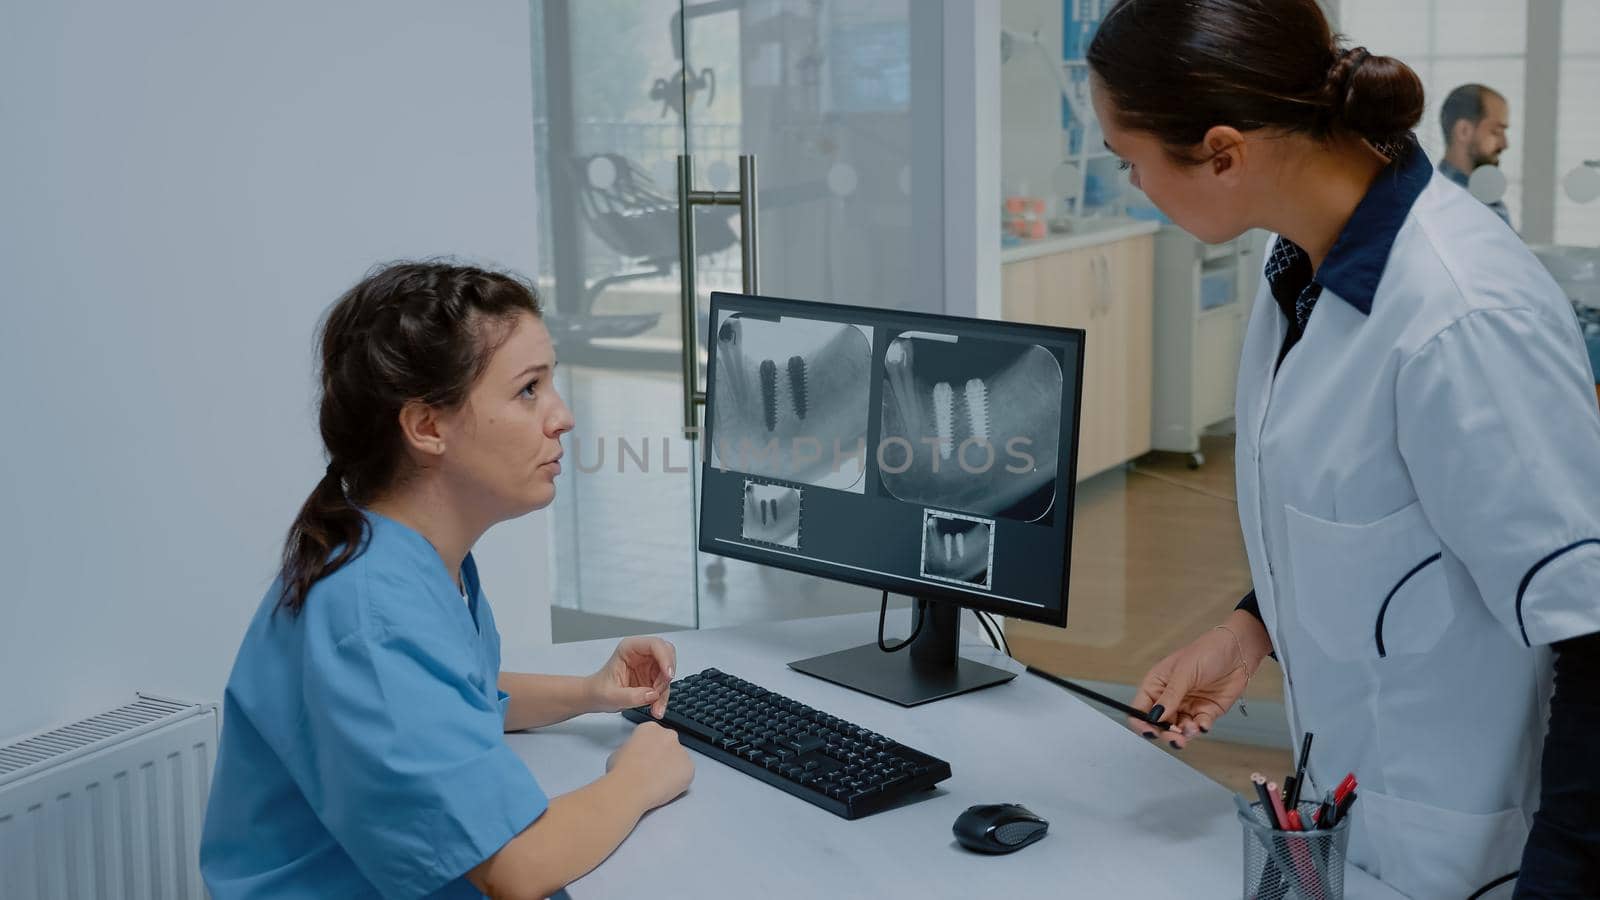 Stomatologist and nurse examining dental x ray scan on computer monitor for patient teethcare. Dentist and assistant at oral care clinic using device for radiography of dentition